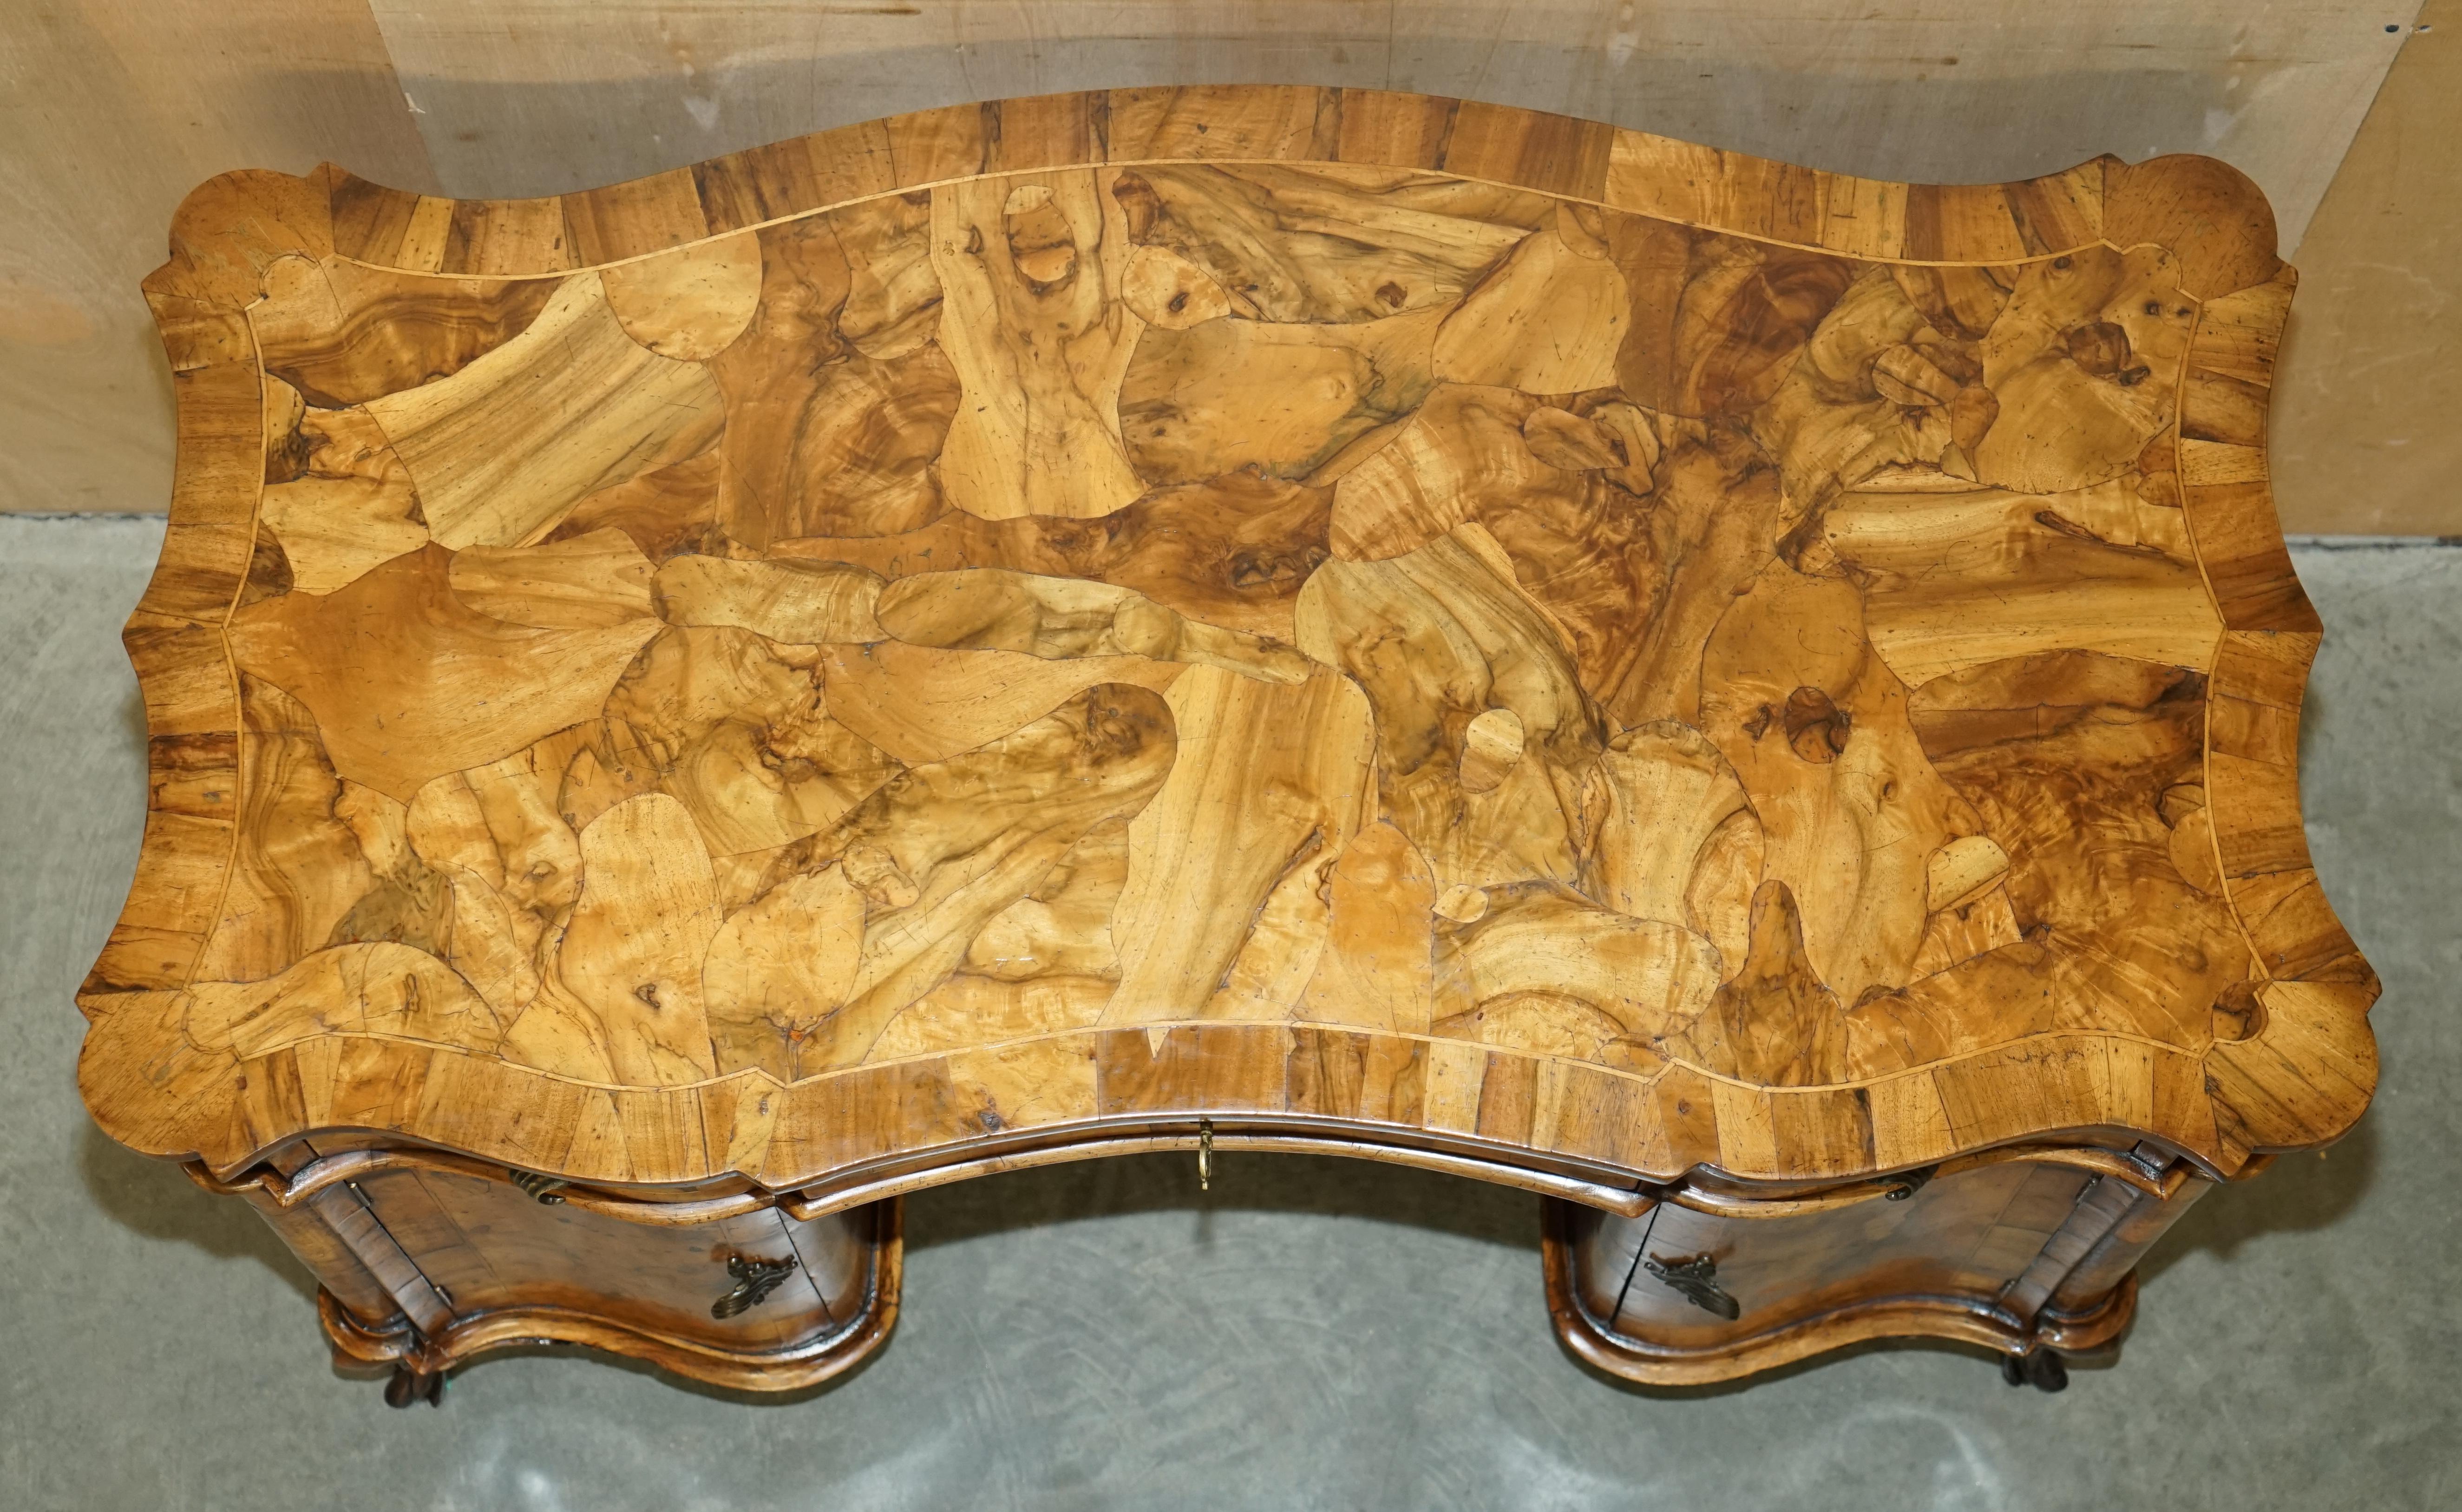 EXQUISITE ANTIQUE ITALIAN CIRCA 1860 OLIVE WOOD DESK WRITING TABLE SUBLiME WOOD For Sale 5